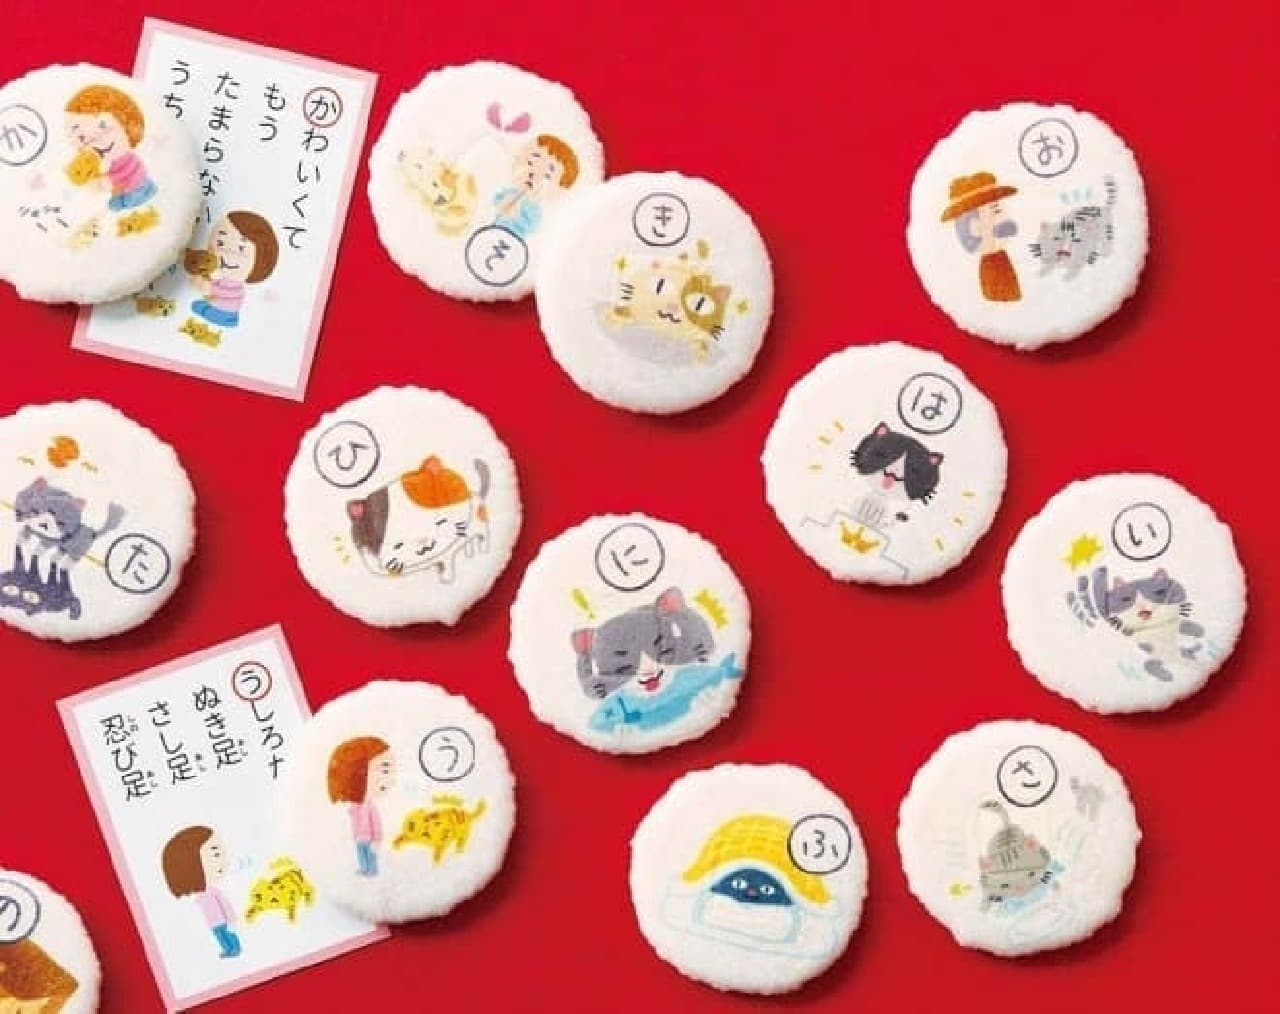 "A karuta with a cat made from fuyaki rice crackers" is now on sale